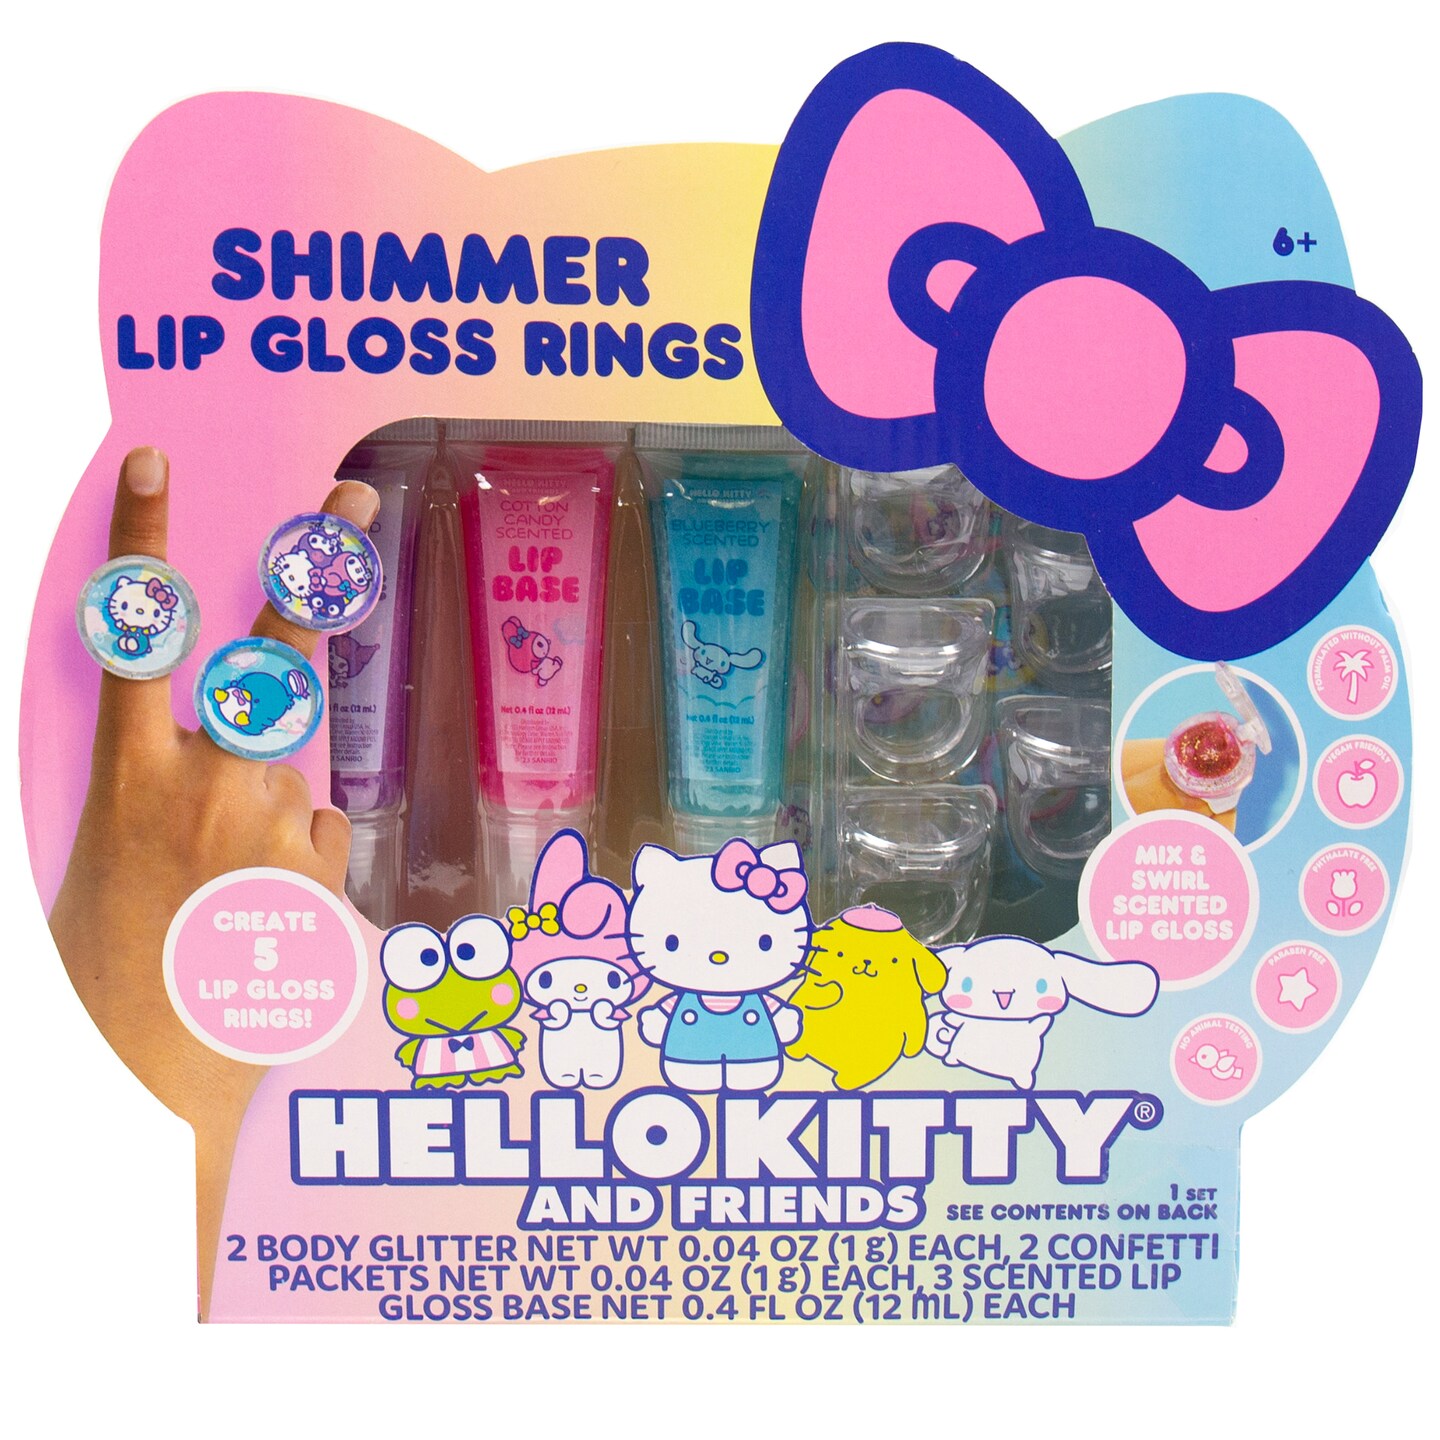 Hello Kitty and Friends Shimmer Lip Gloss Rings